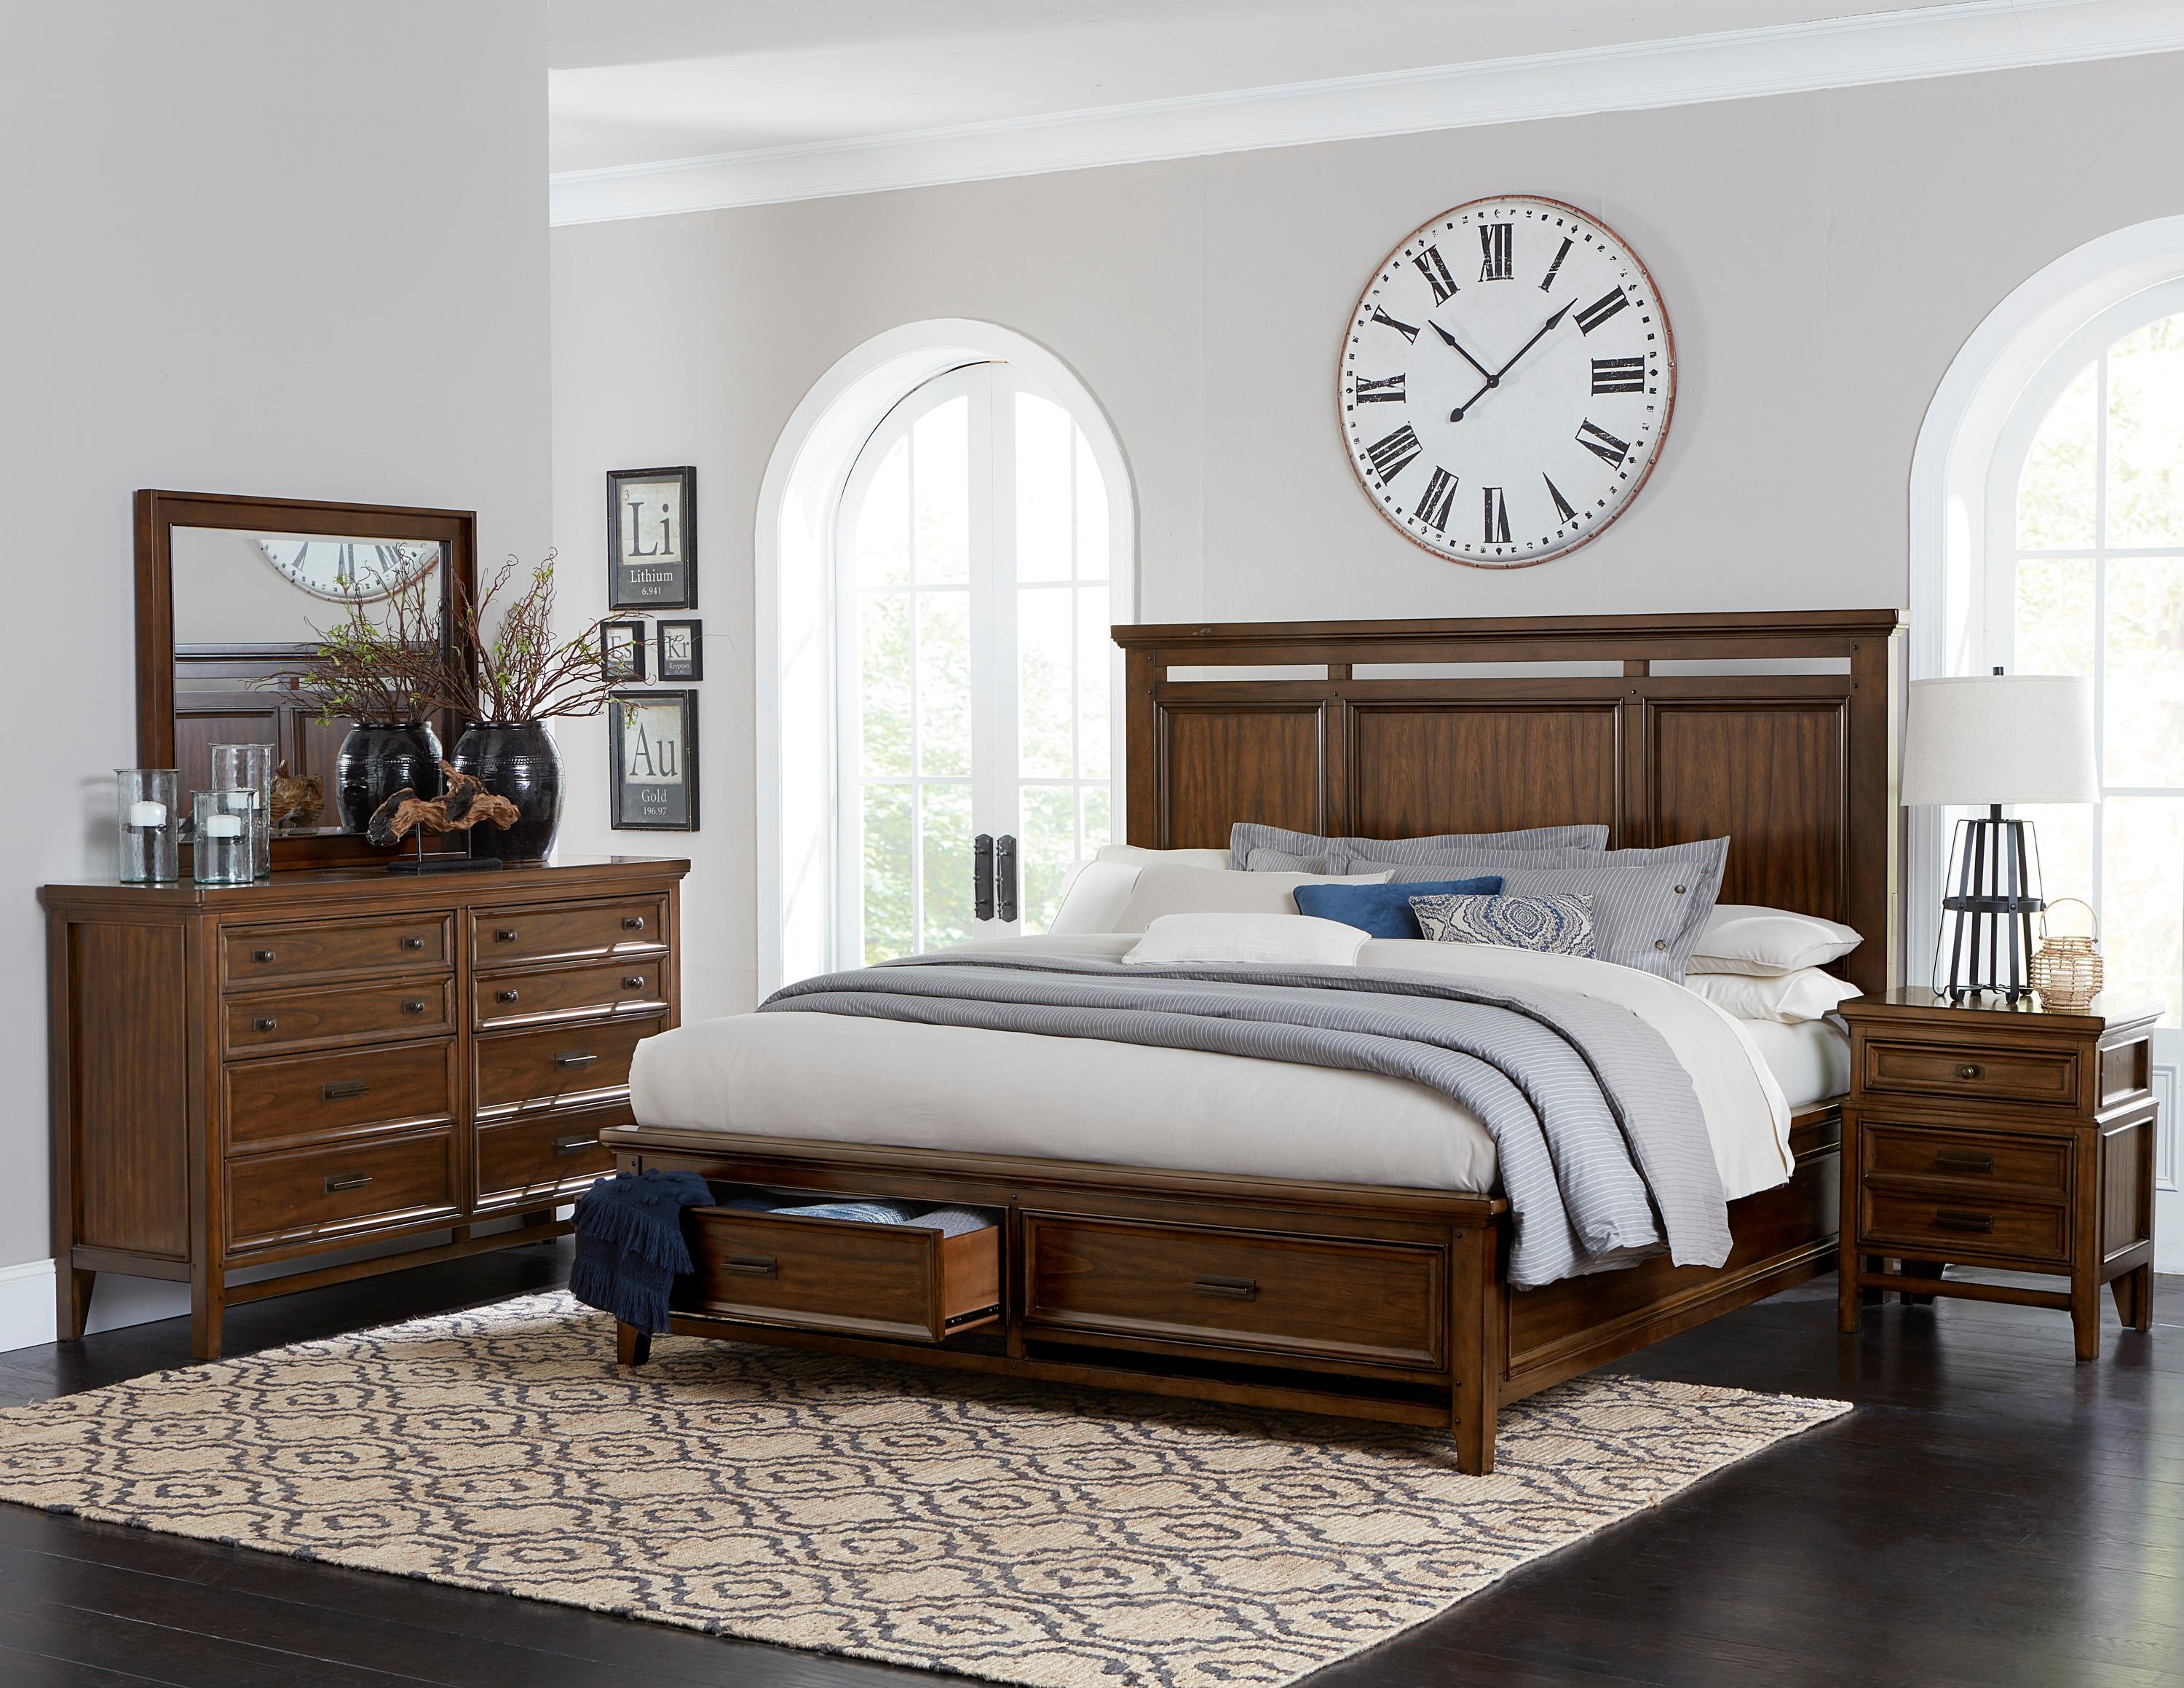 Classic Bedroom Set 1649-1-5PC Frazier Park 1649-1-5PC in Cherry 